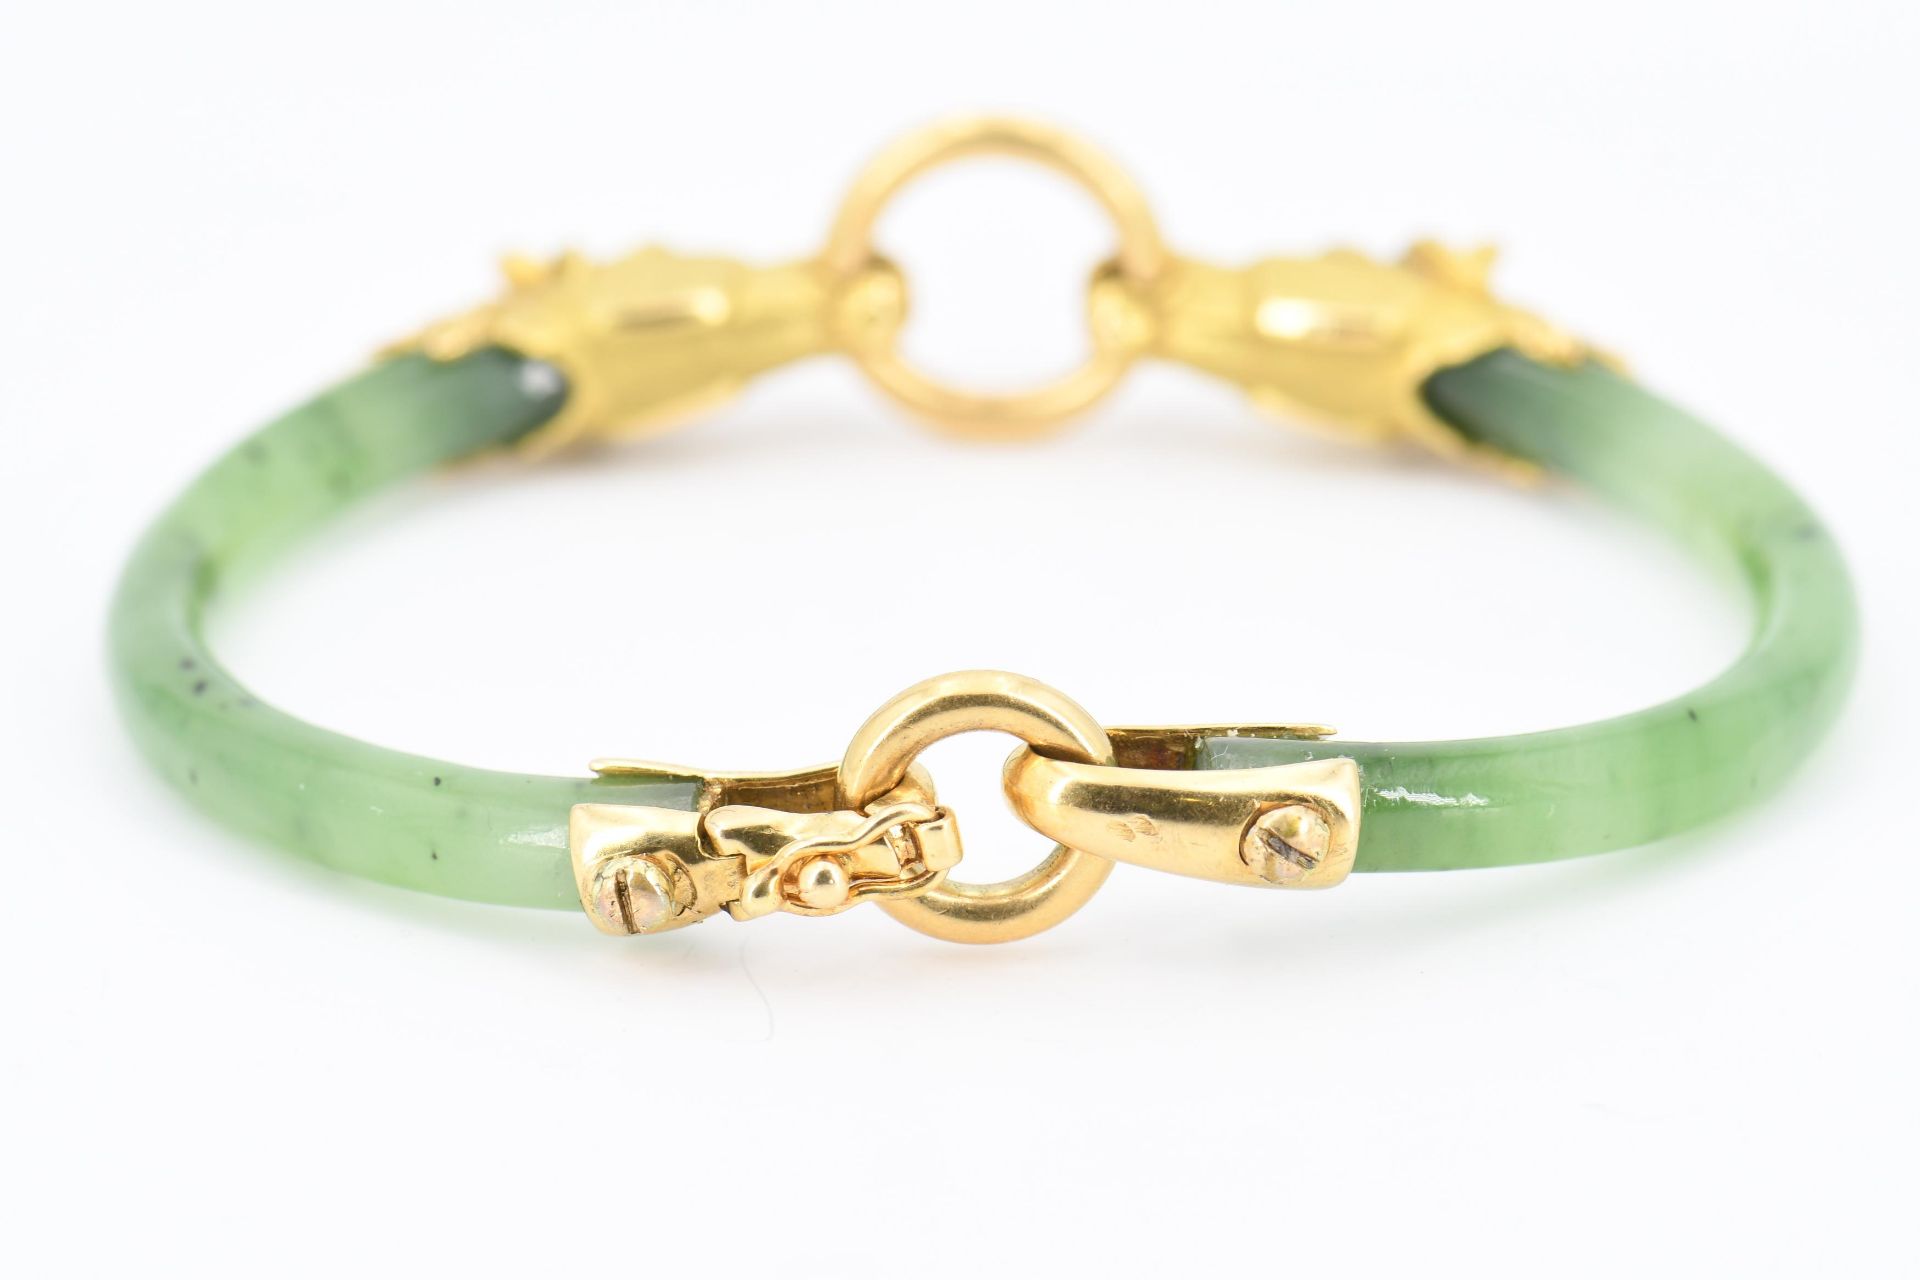 Jade-Bangle with Horse Motif - Image 4 of 6